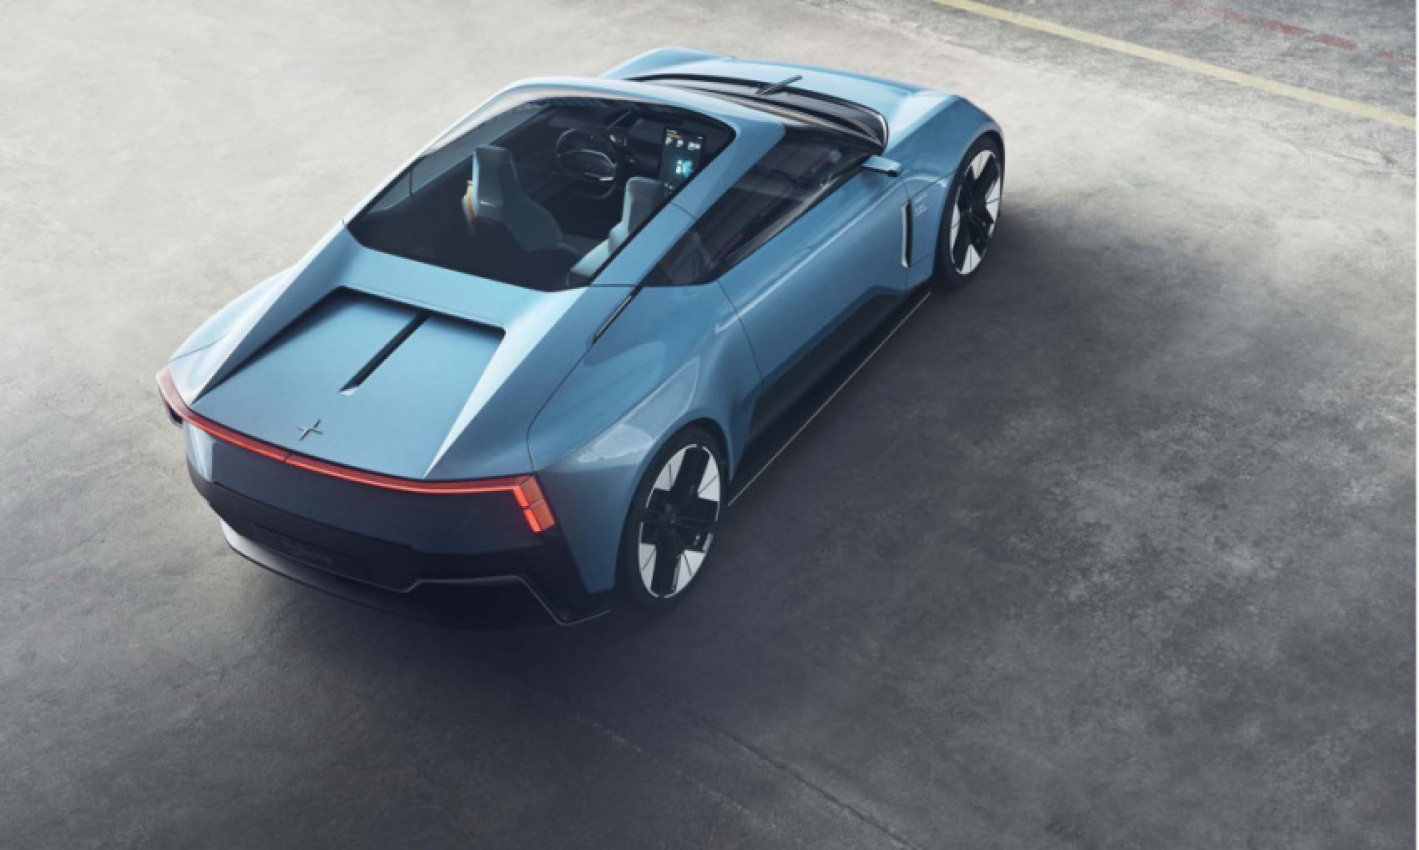 autos, cars, polestar, concept cars, convertibles, electric cars, polestar news, sports cars, polestar o2 concept blows the top off for electric cars